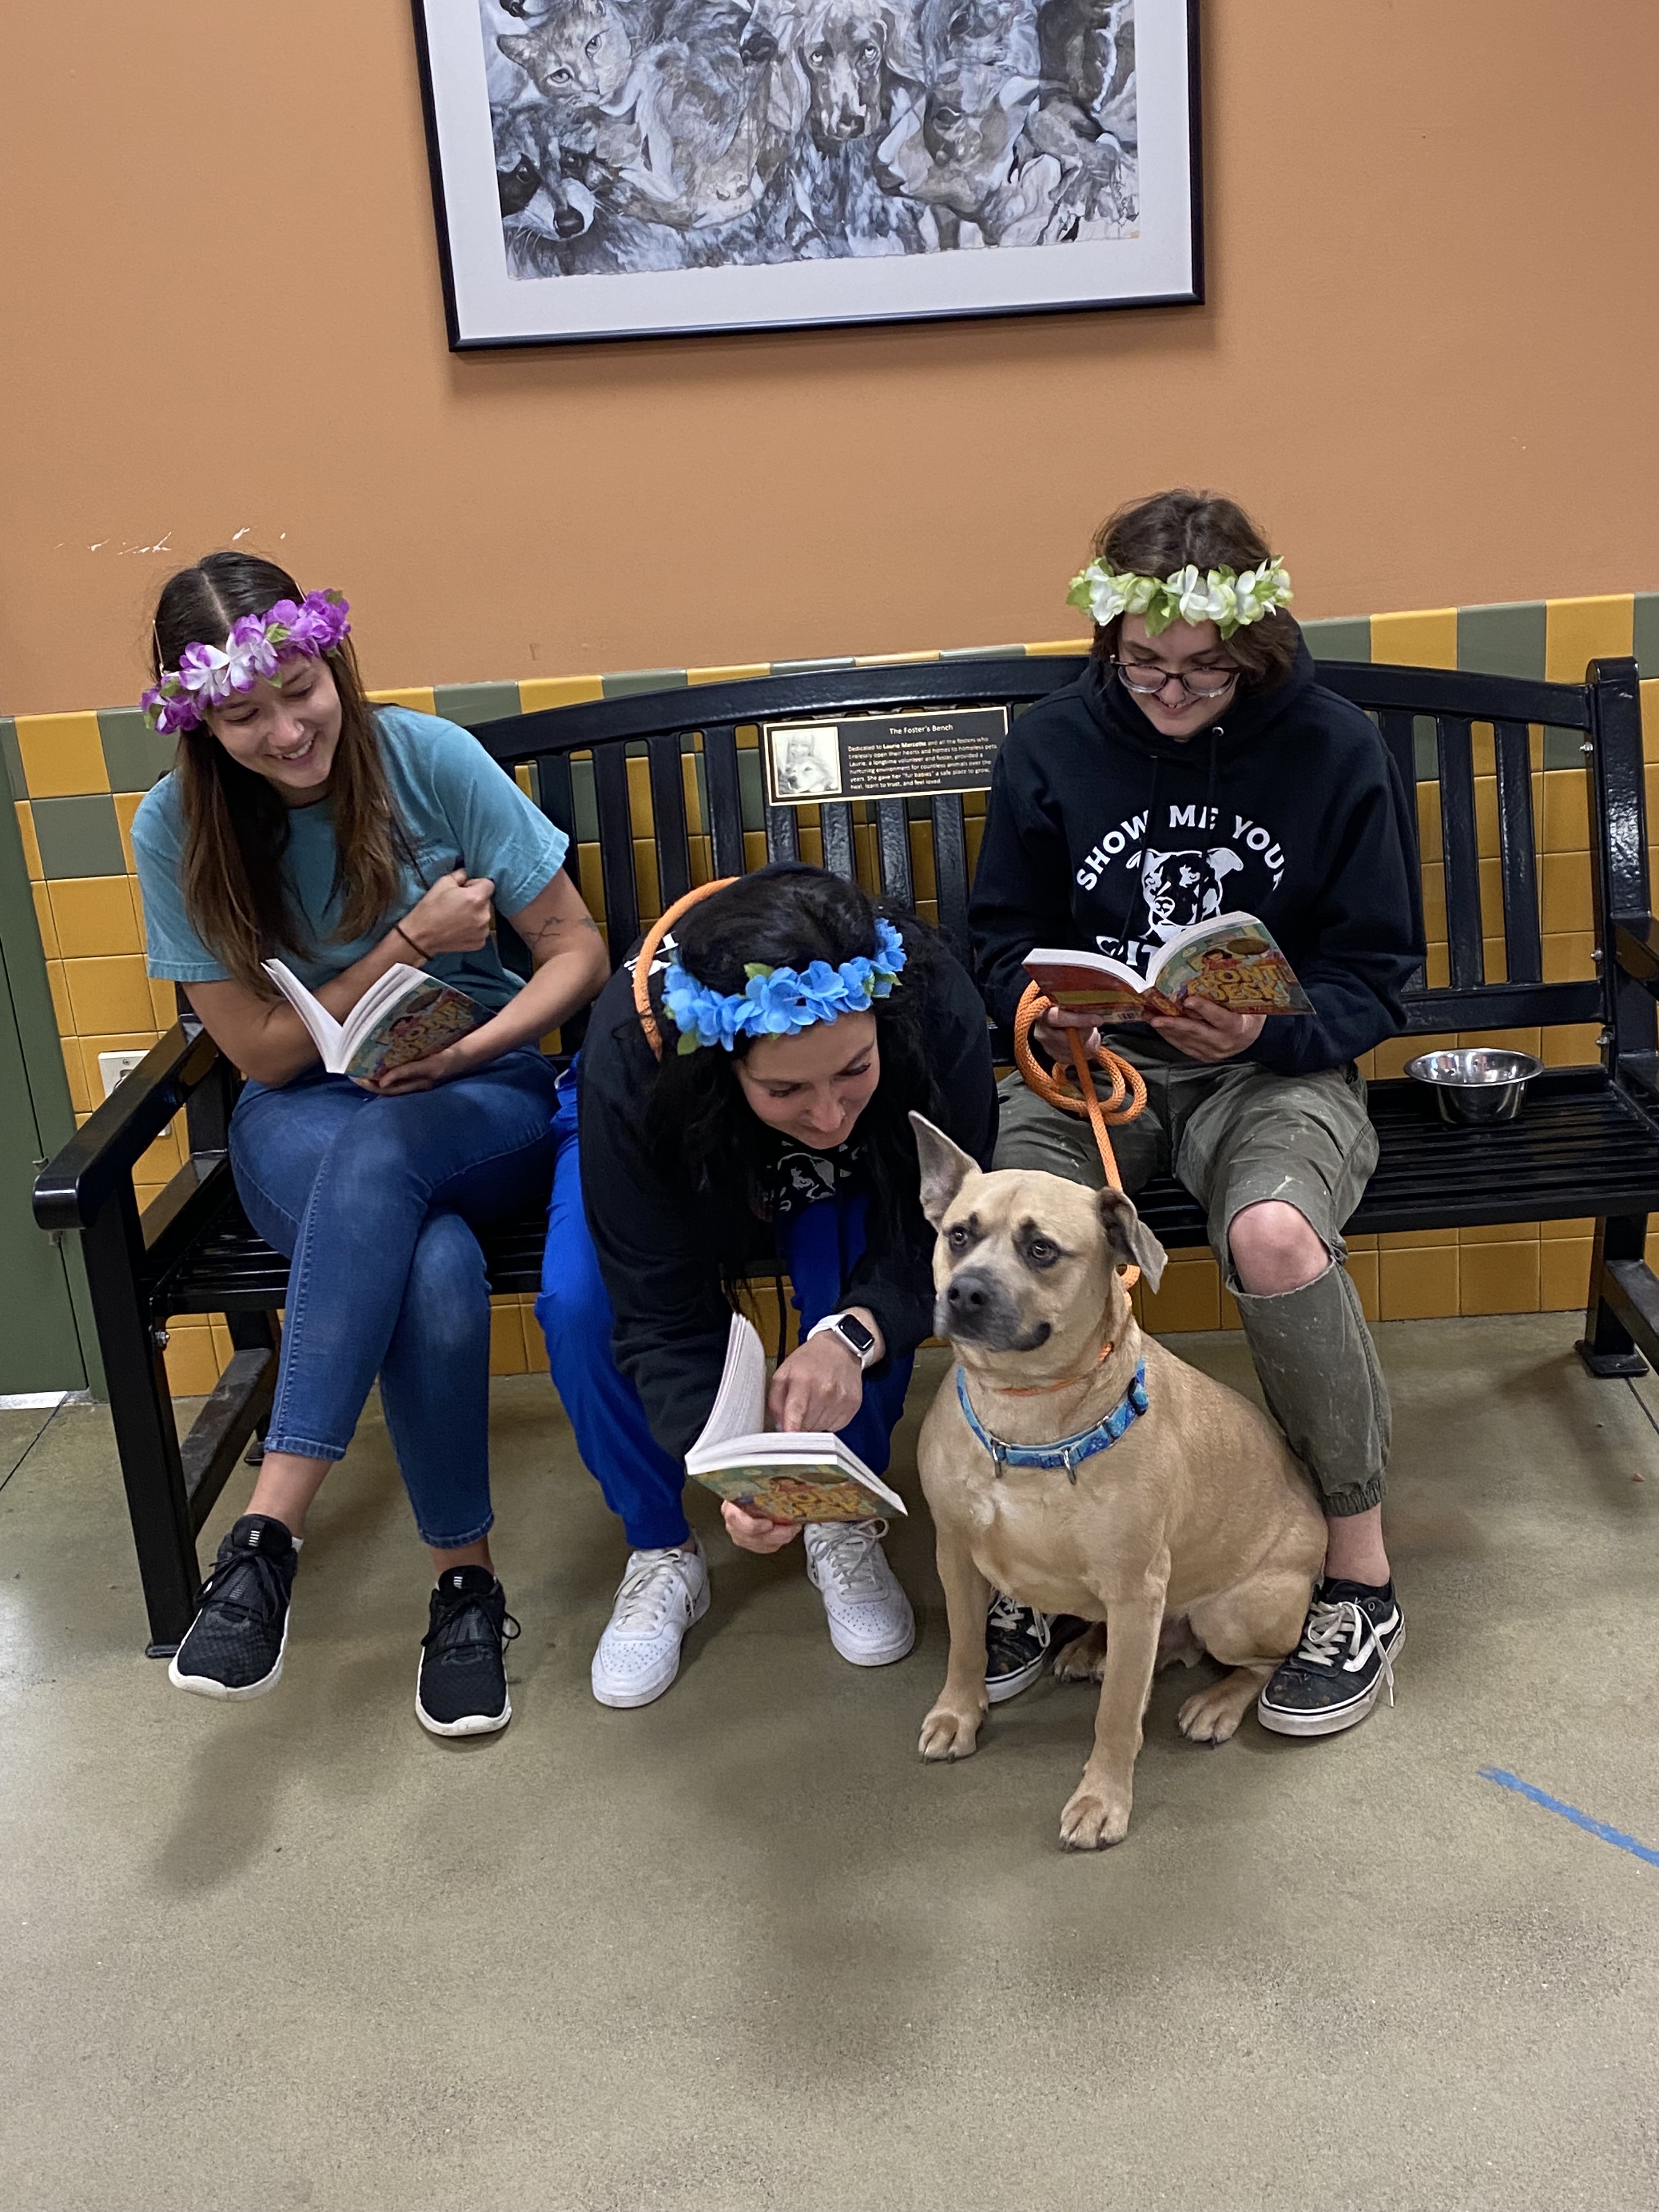 AFD 2022 - Reading with dogs and floral headbands